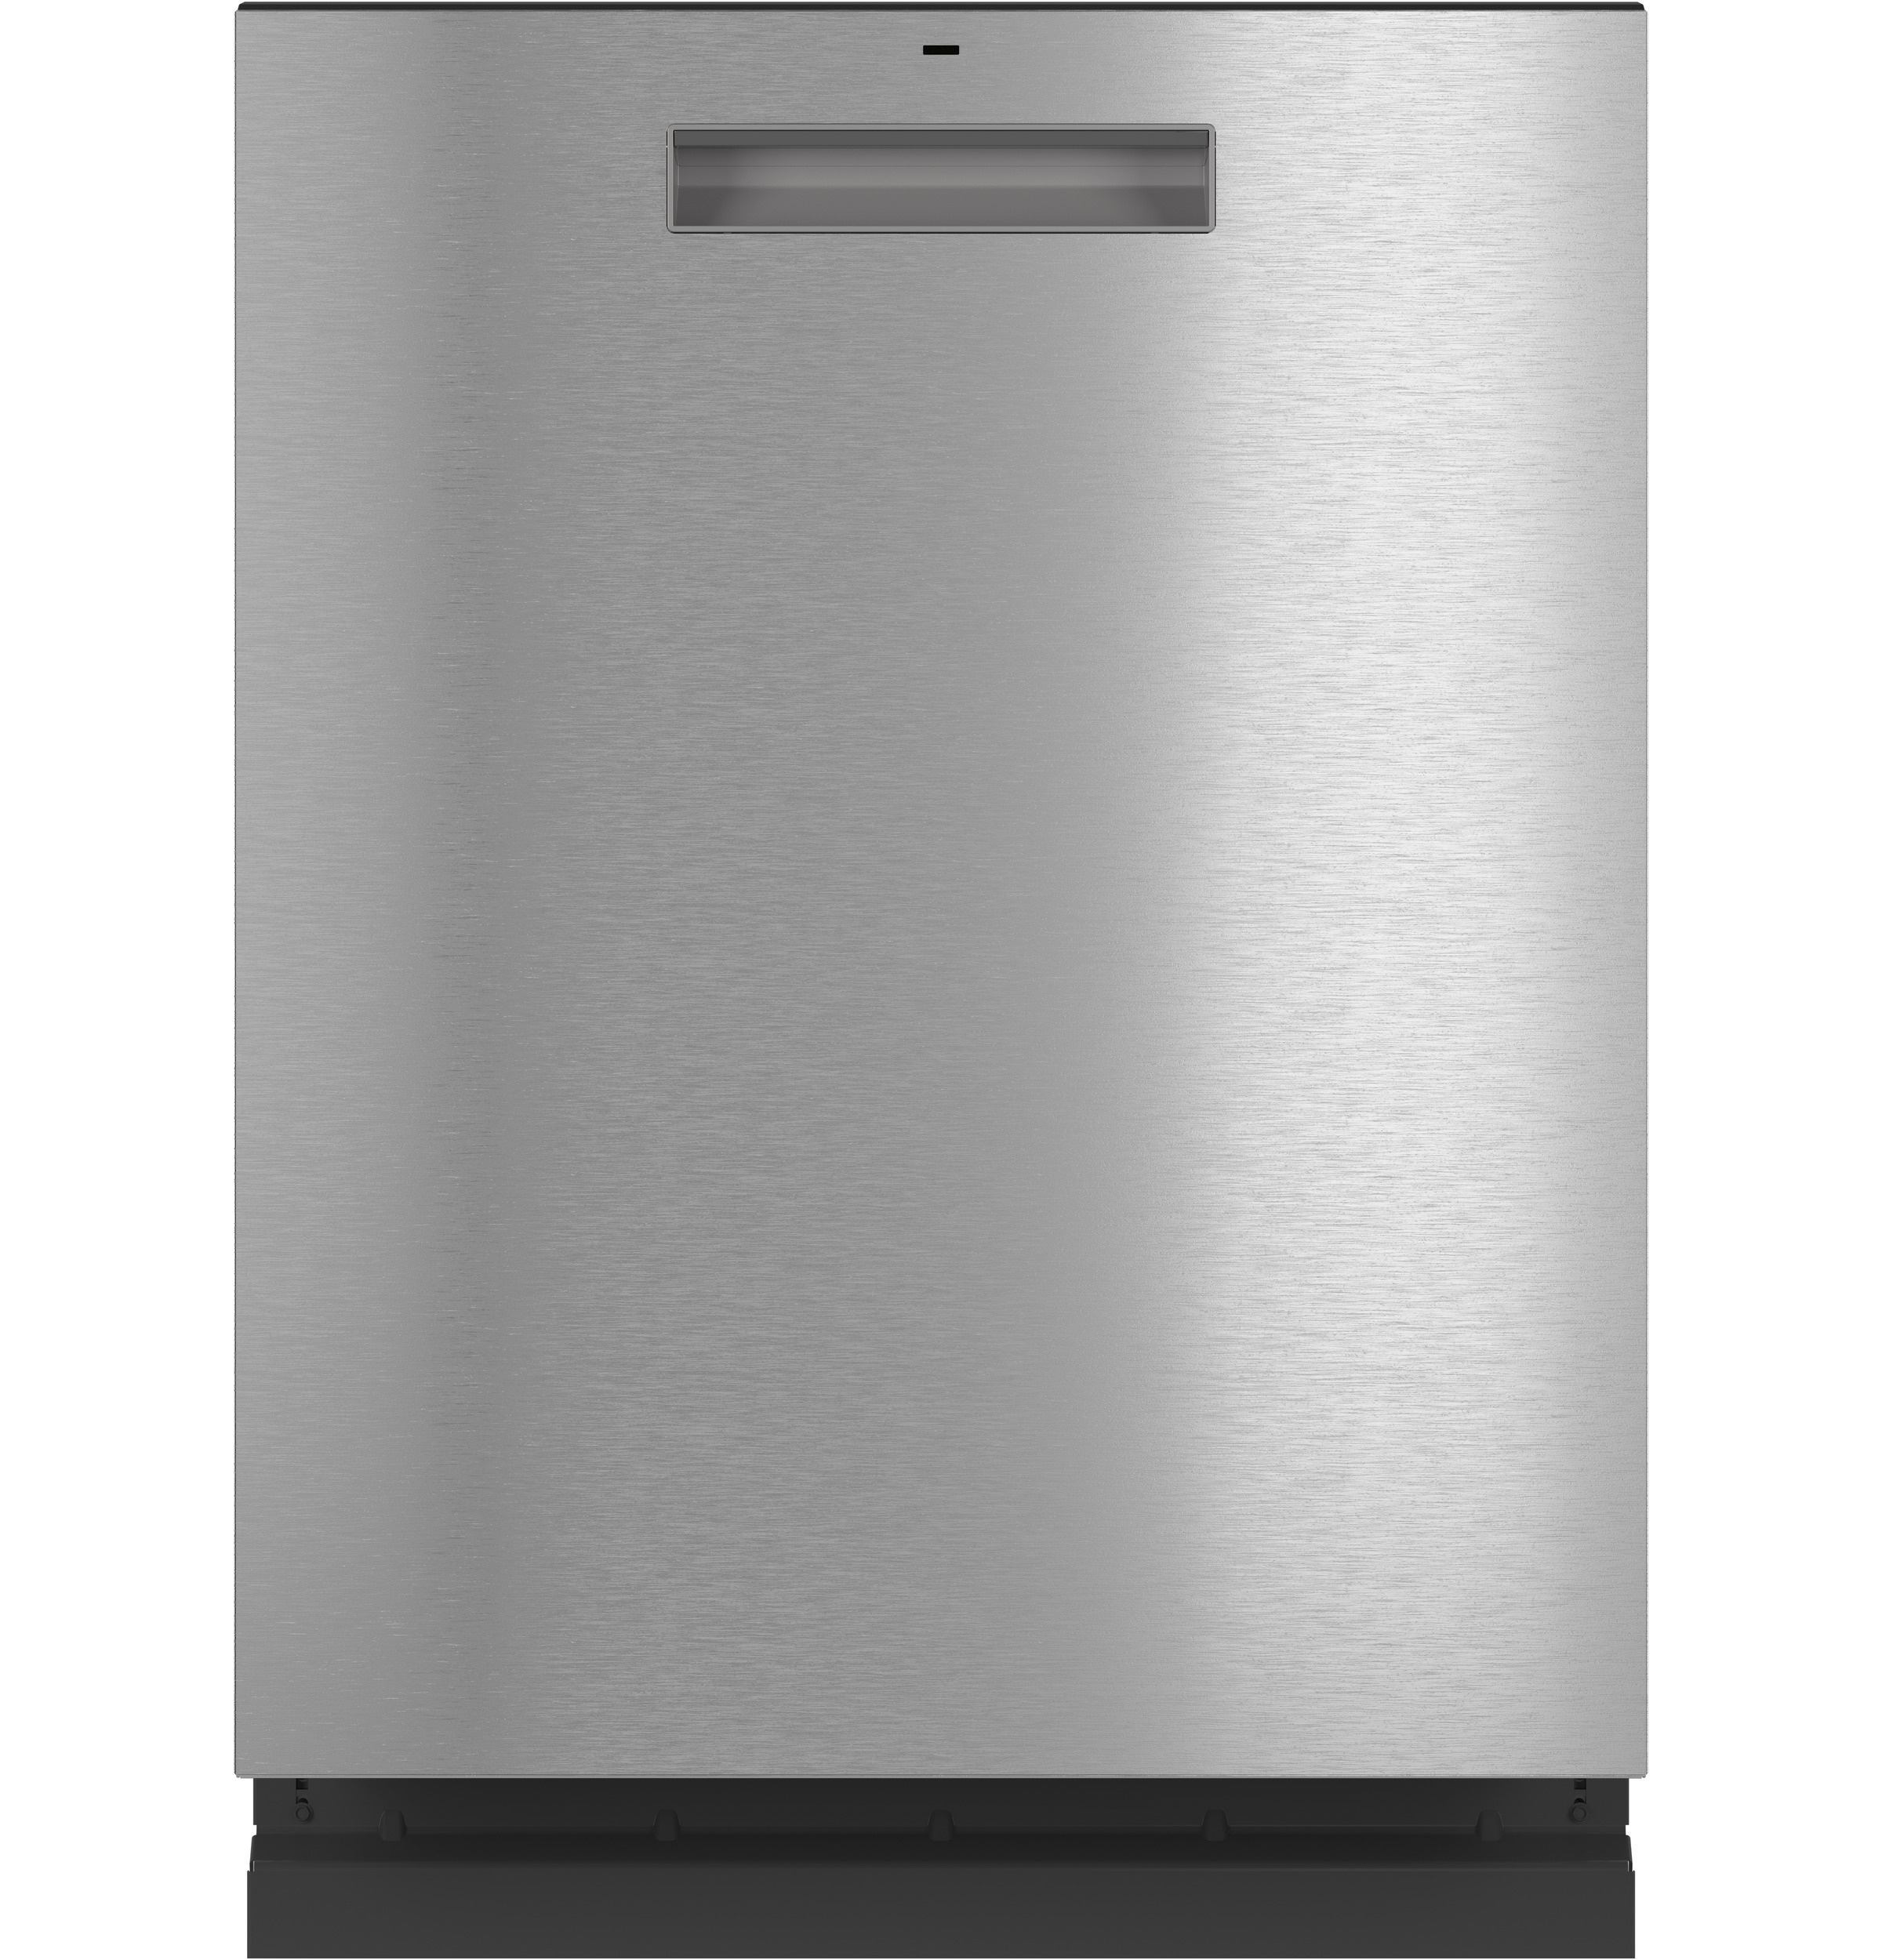 Café™ ENERGY STAR® Stainless Steel Interior Dishwasher with Sanitize and Ultra Wash & Dry in Platinum Glass